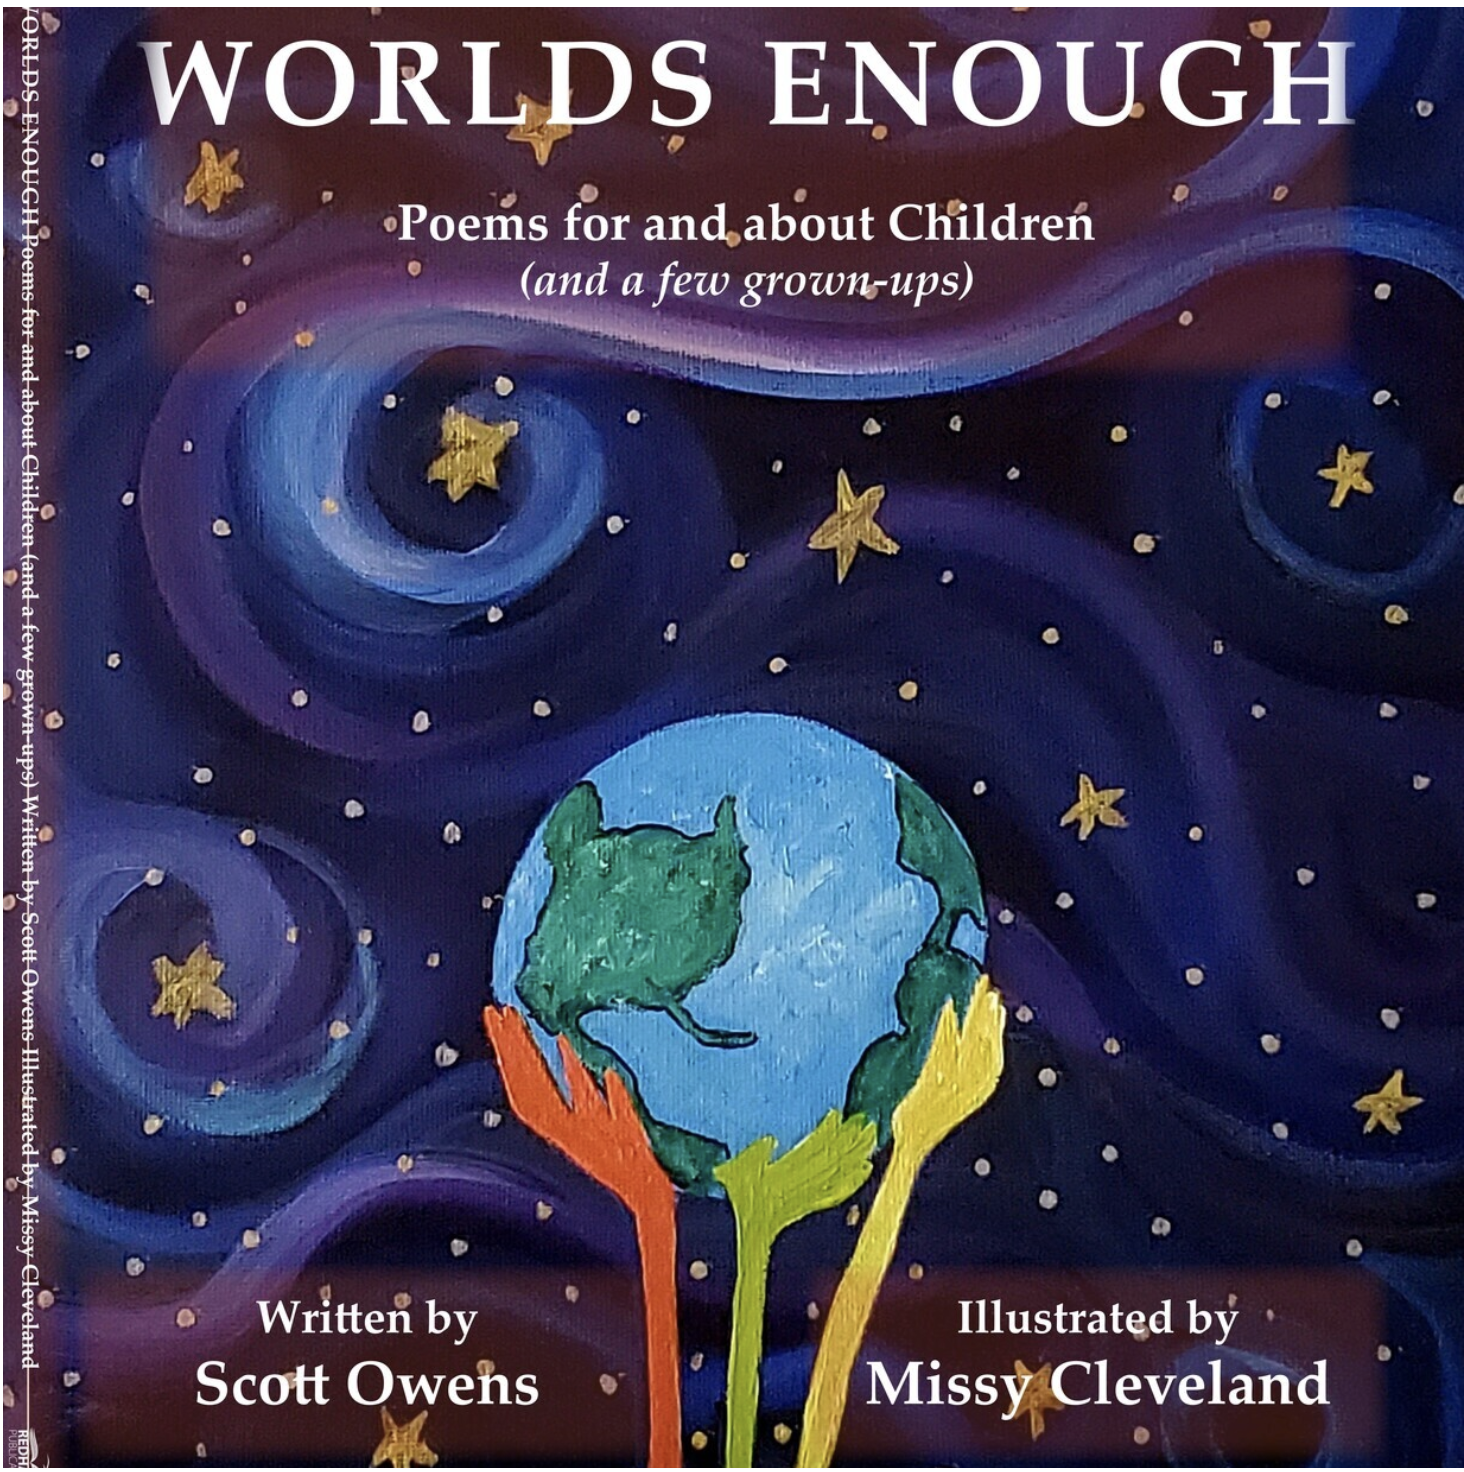 Worlds Enough by Scott Owens